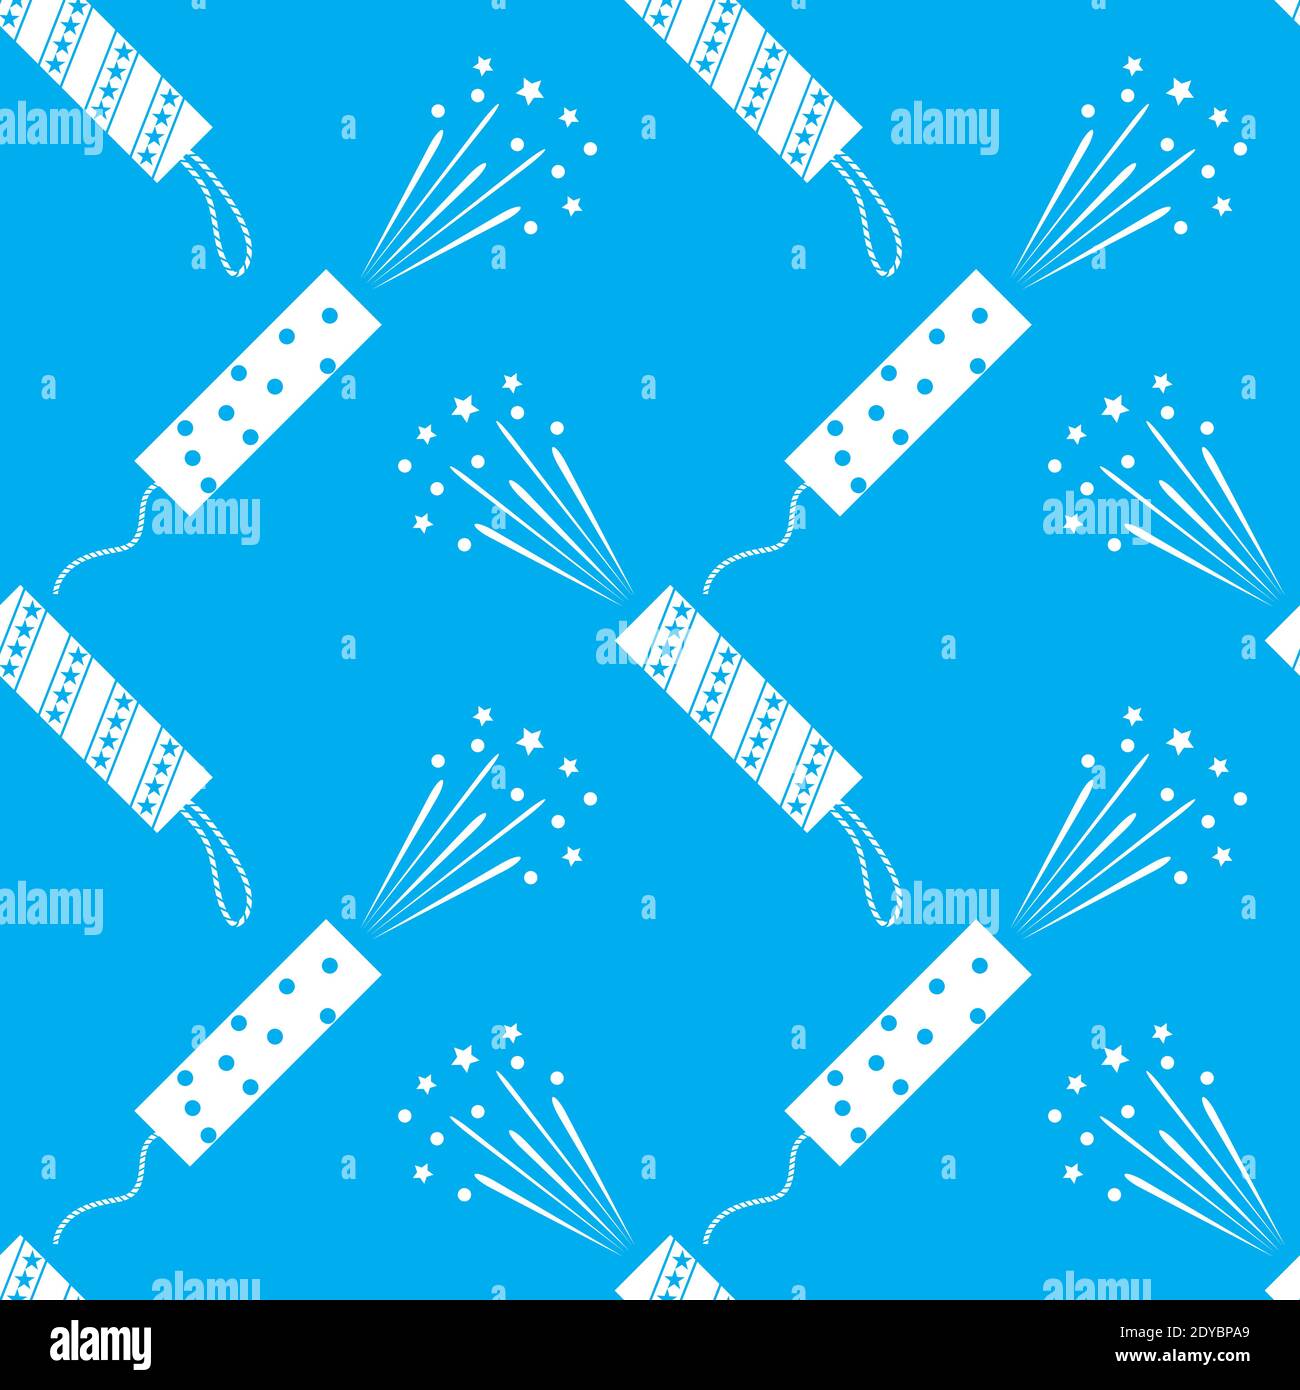 Set of Different Slapstick Icon Isolated on Blue Background. Seamless Pattern Stock Vector